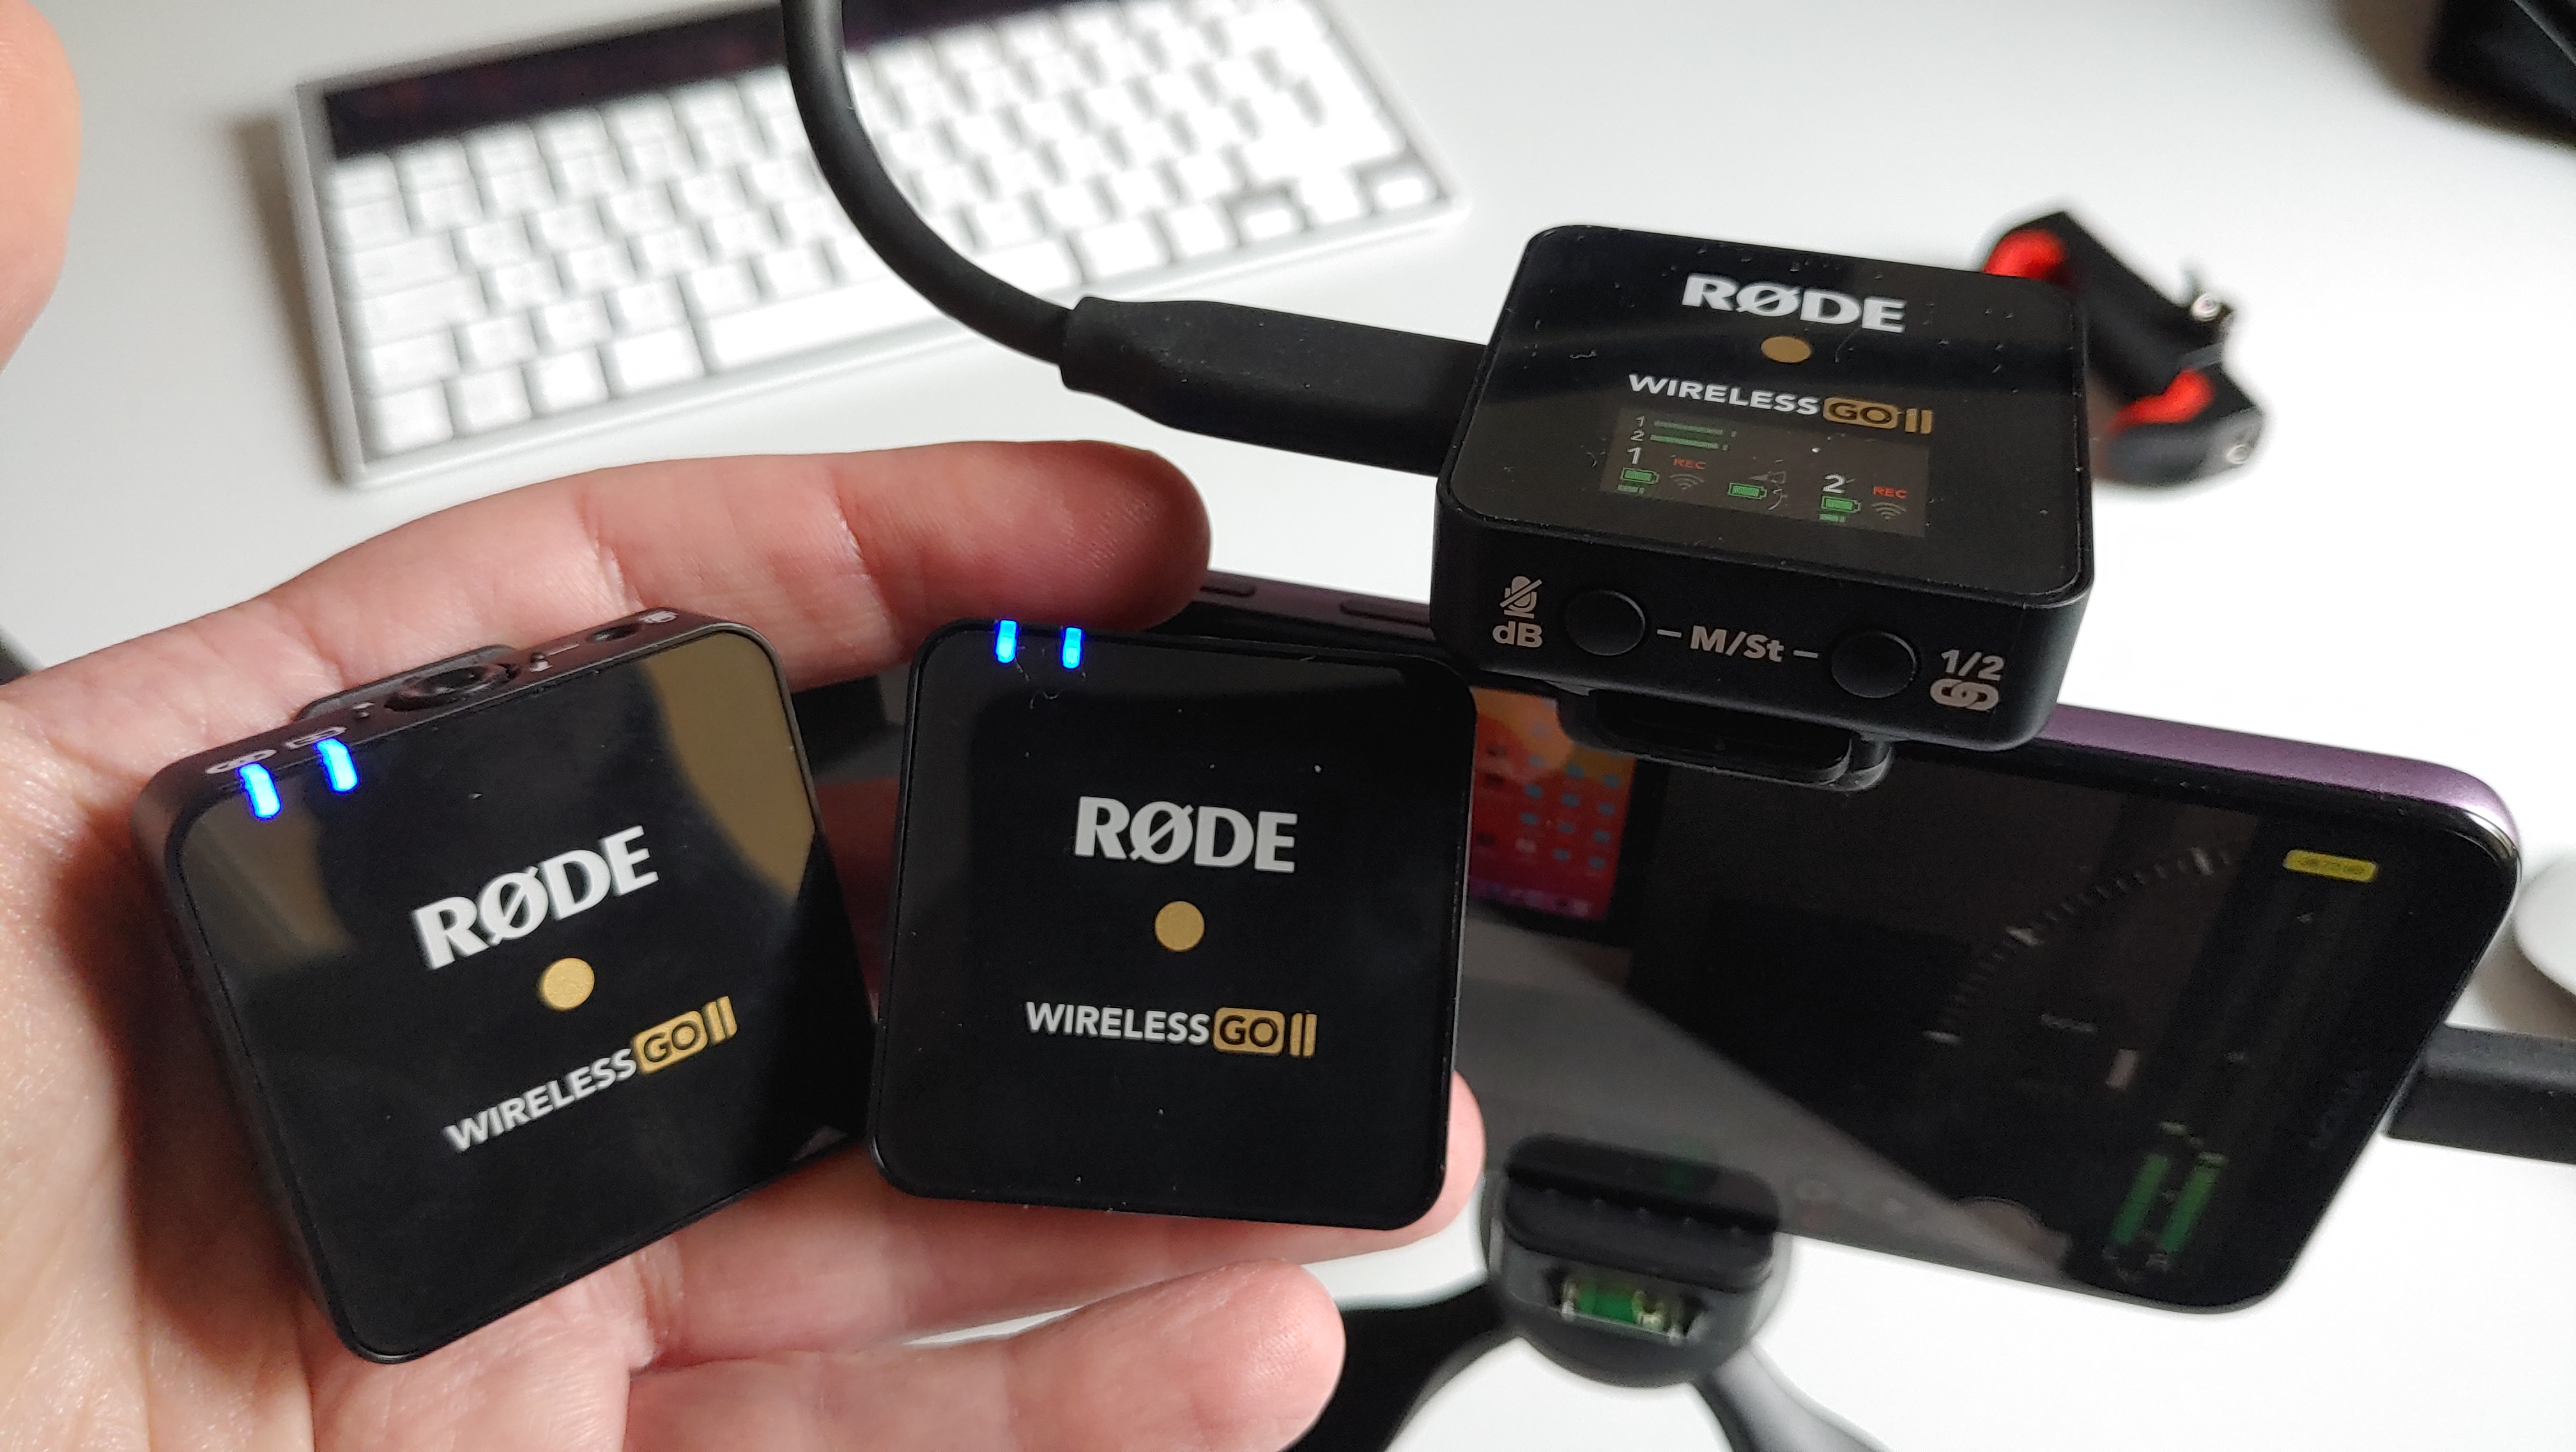 43 The Rode Wireless Go II review – Essential audio gear for